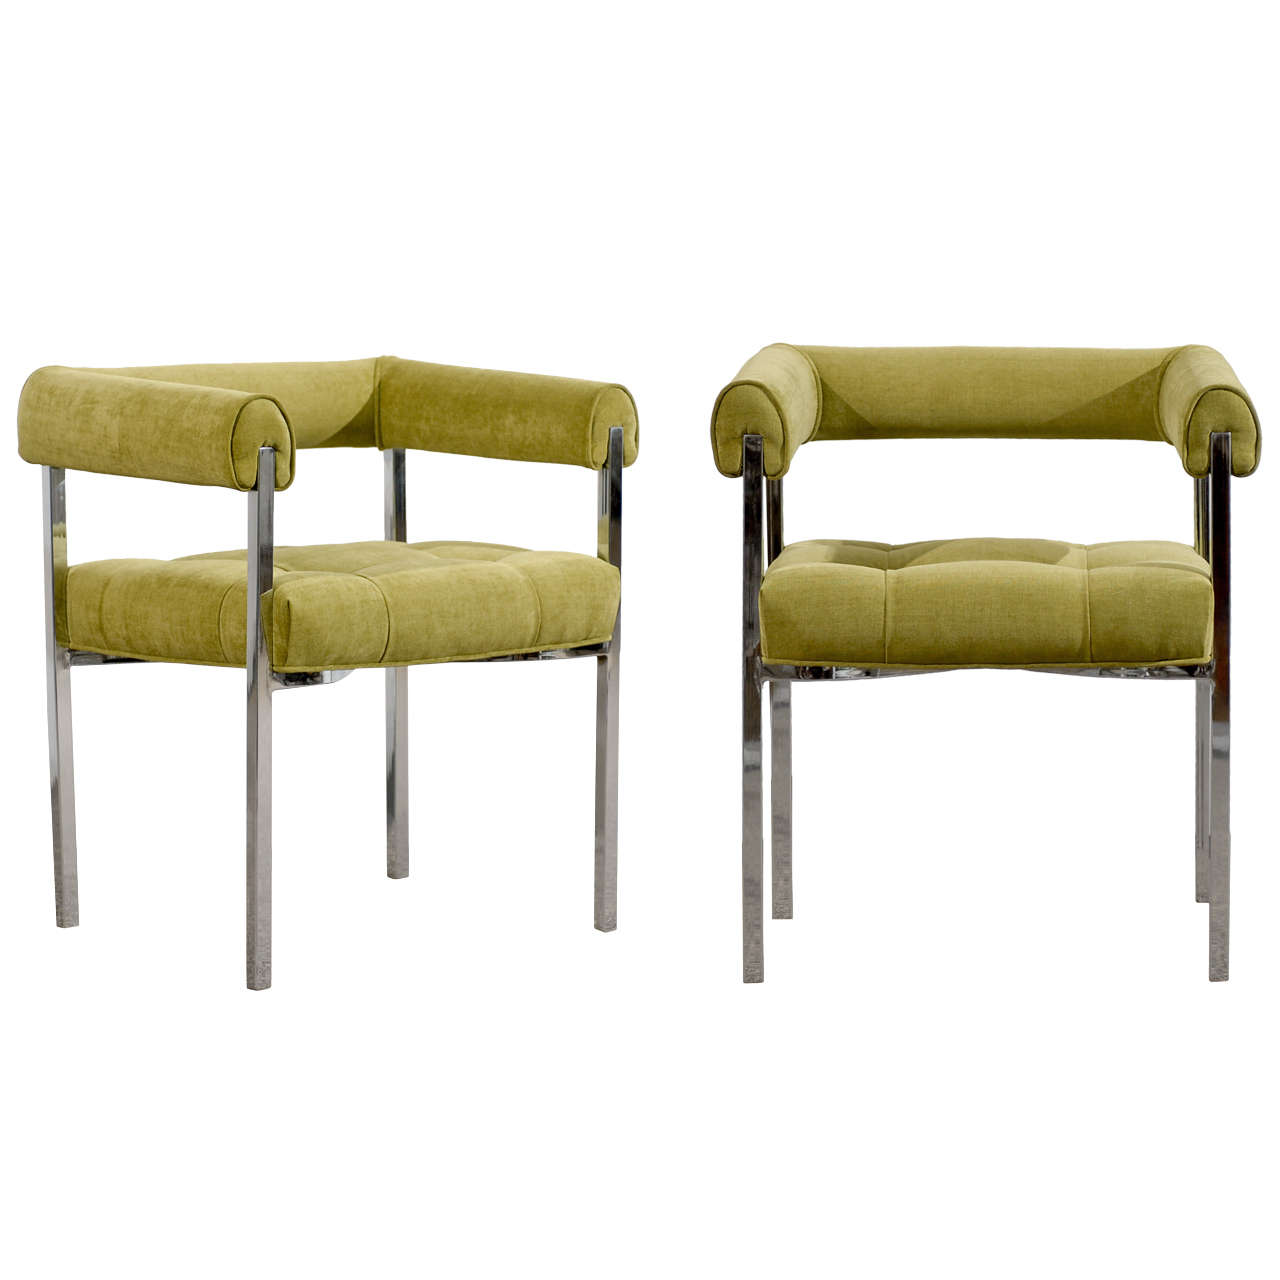 Beautiful Milo Baughman Style Chrome Armchairs in Lime Chenille For Sale